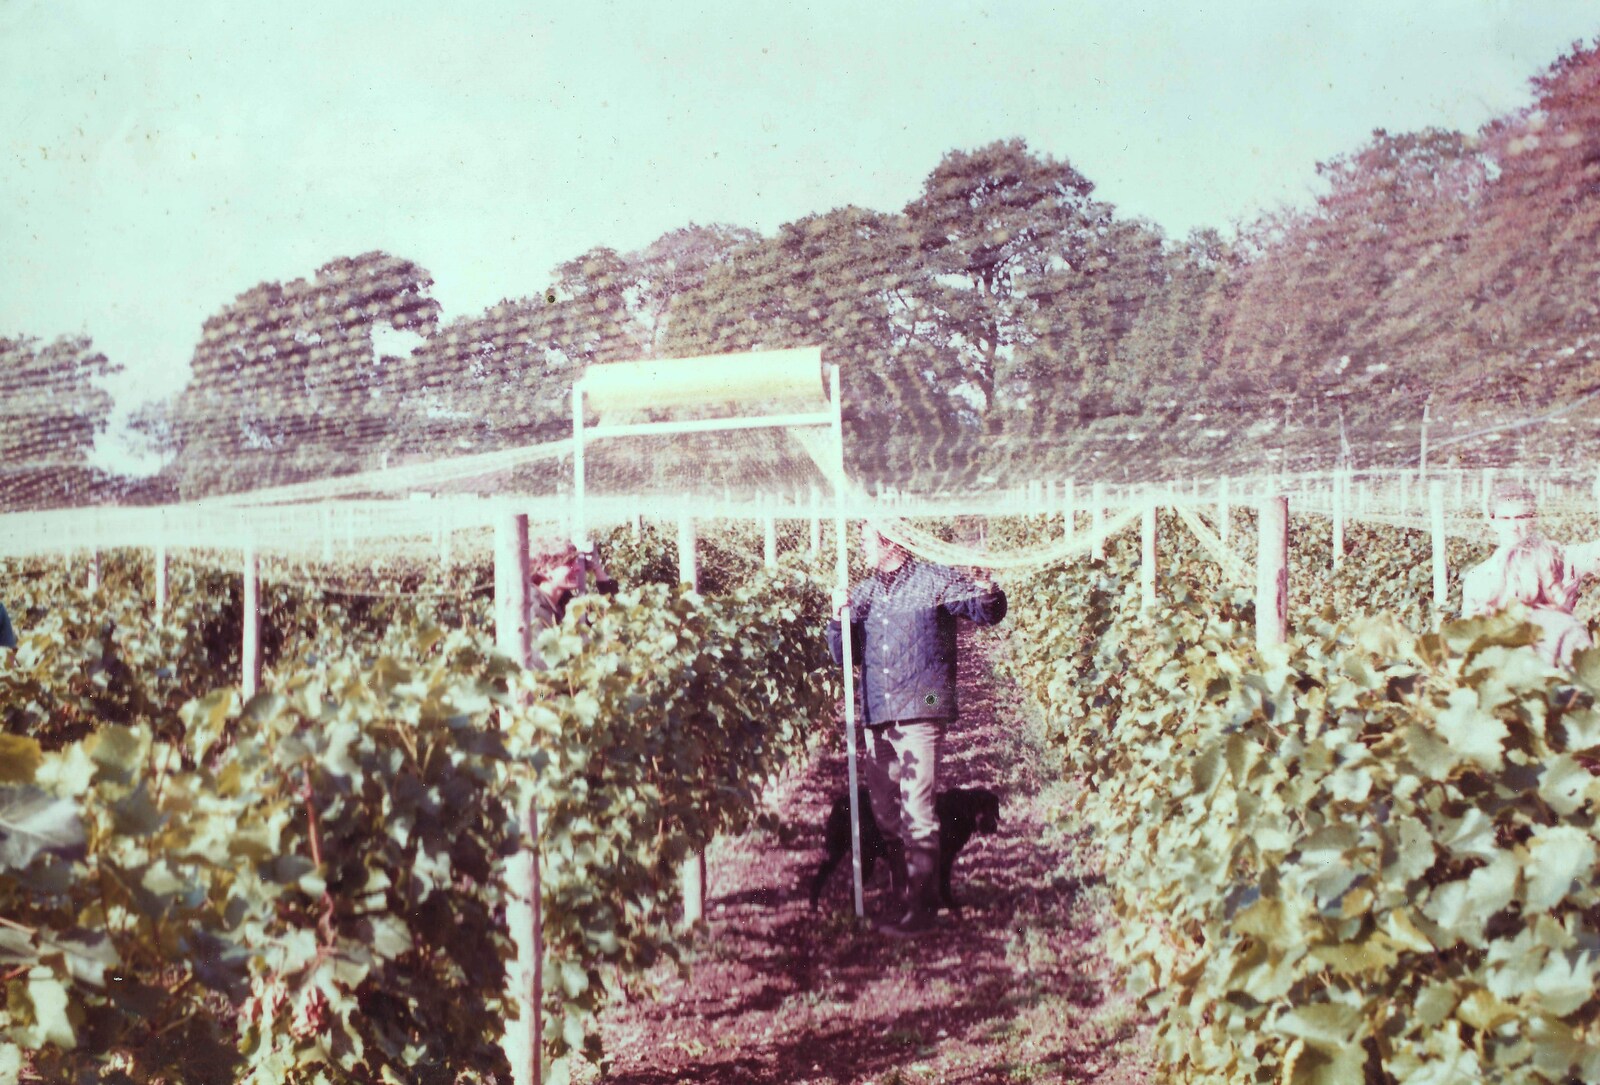 Nets are pulled over to keep birds off from Constructing a Vineyard, Harrow Road, Bransgore, Dorset - 1st September 1981